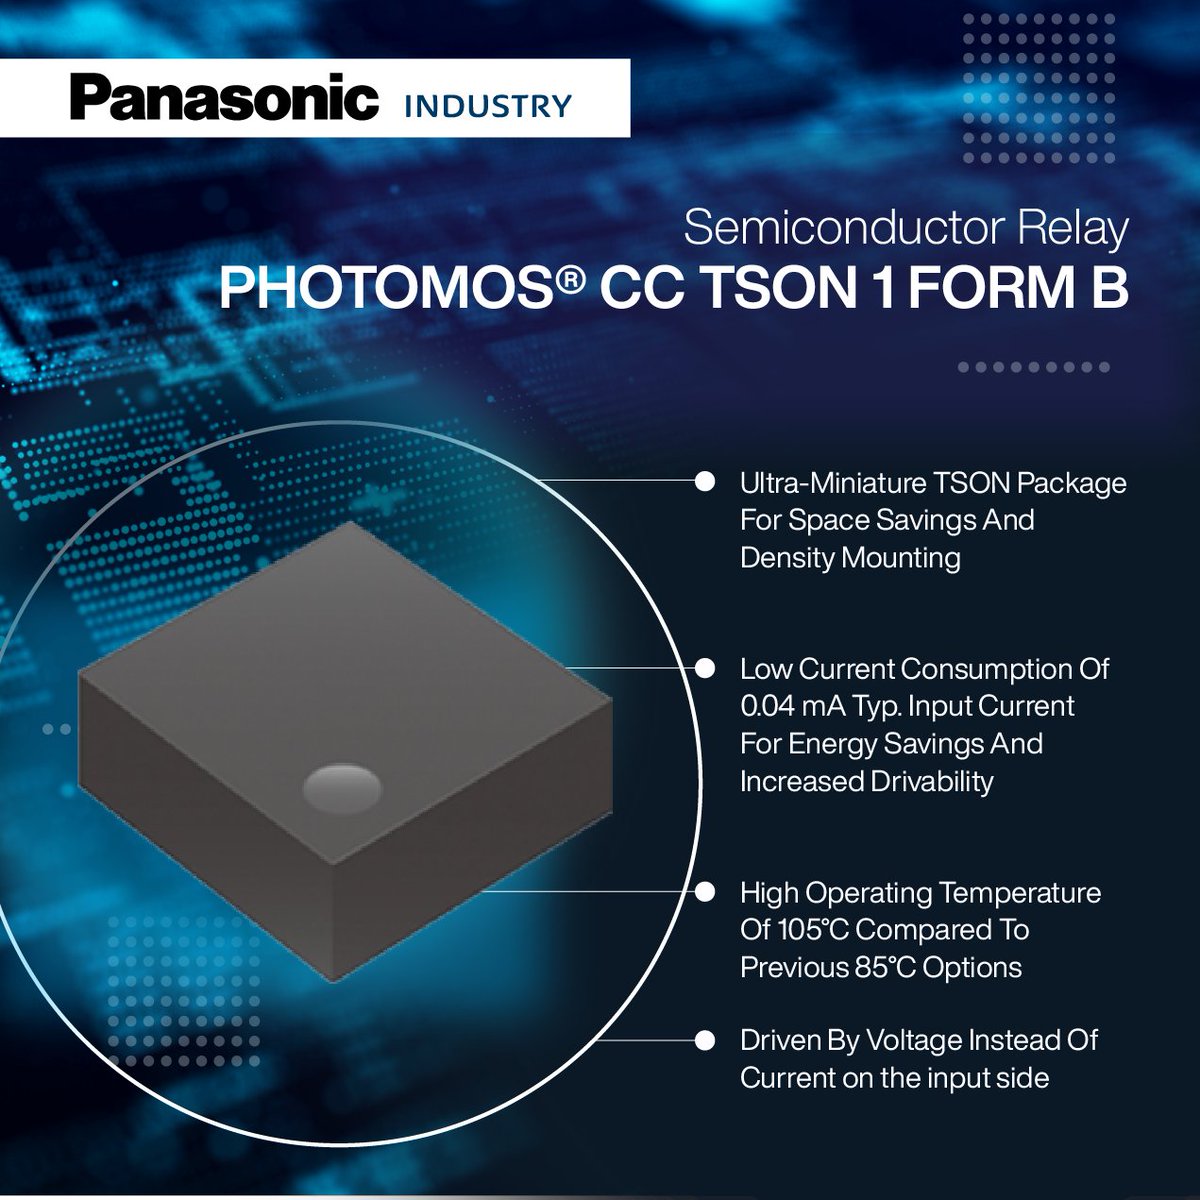 Tech Spotlight 🌟| PhotoMOS® CC TSON 1 Form B Semiconductor Relays The #Relays are well-suited for applications in measuring equipment, security systems, and wearable devices where low power consumption is essential. Learn more: okt.to/Cisgvx #Panasonic #Technology